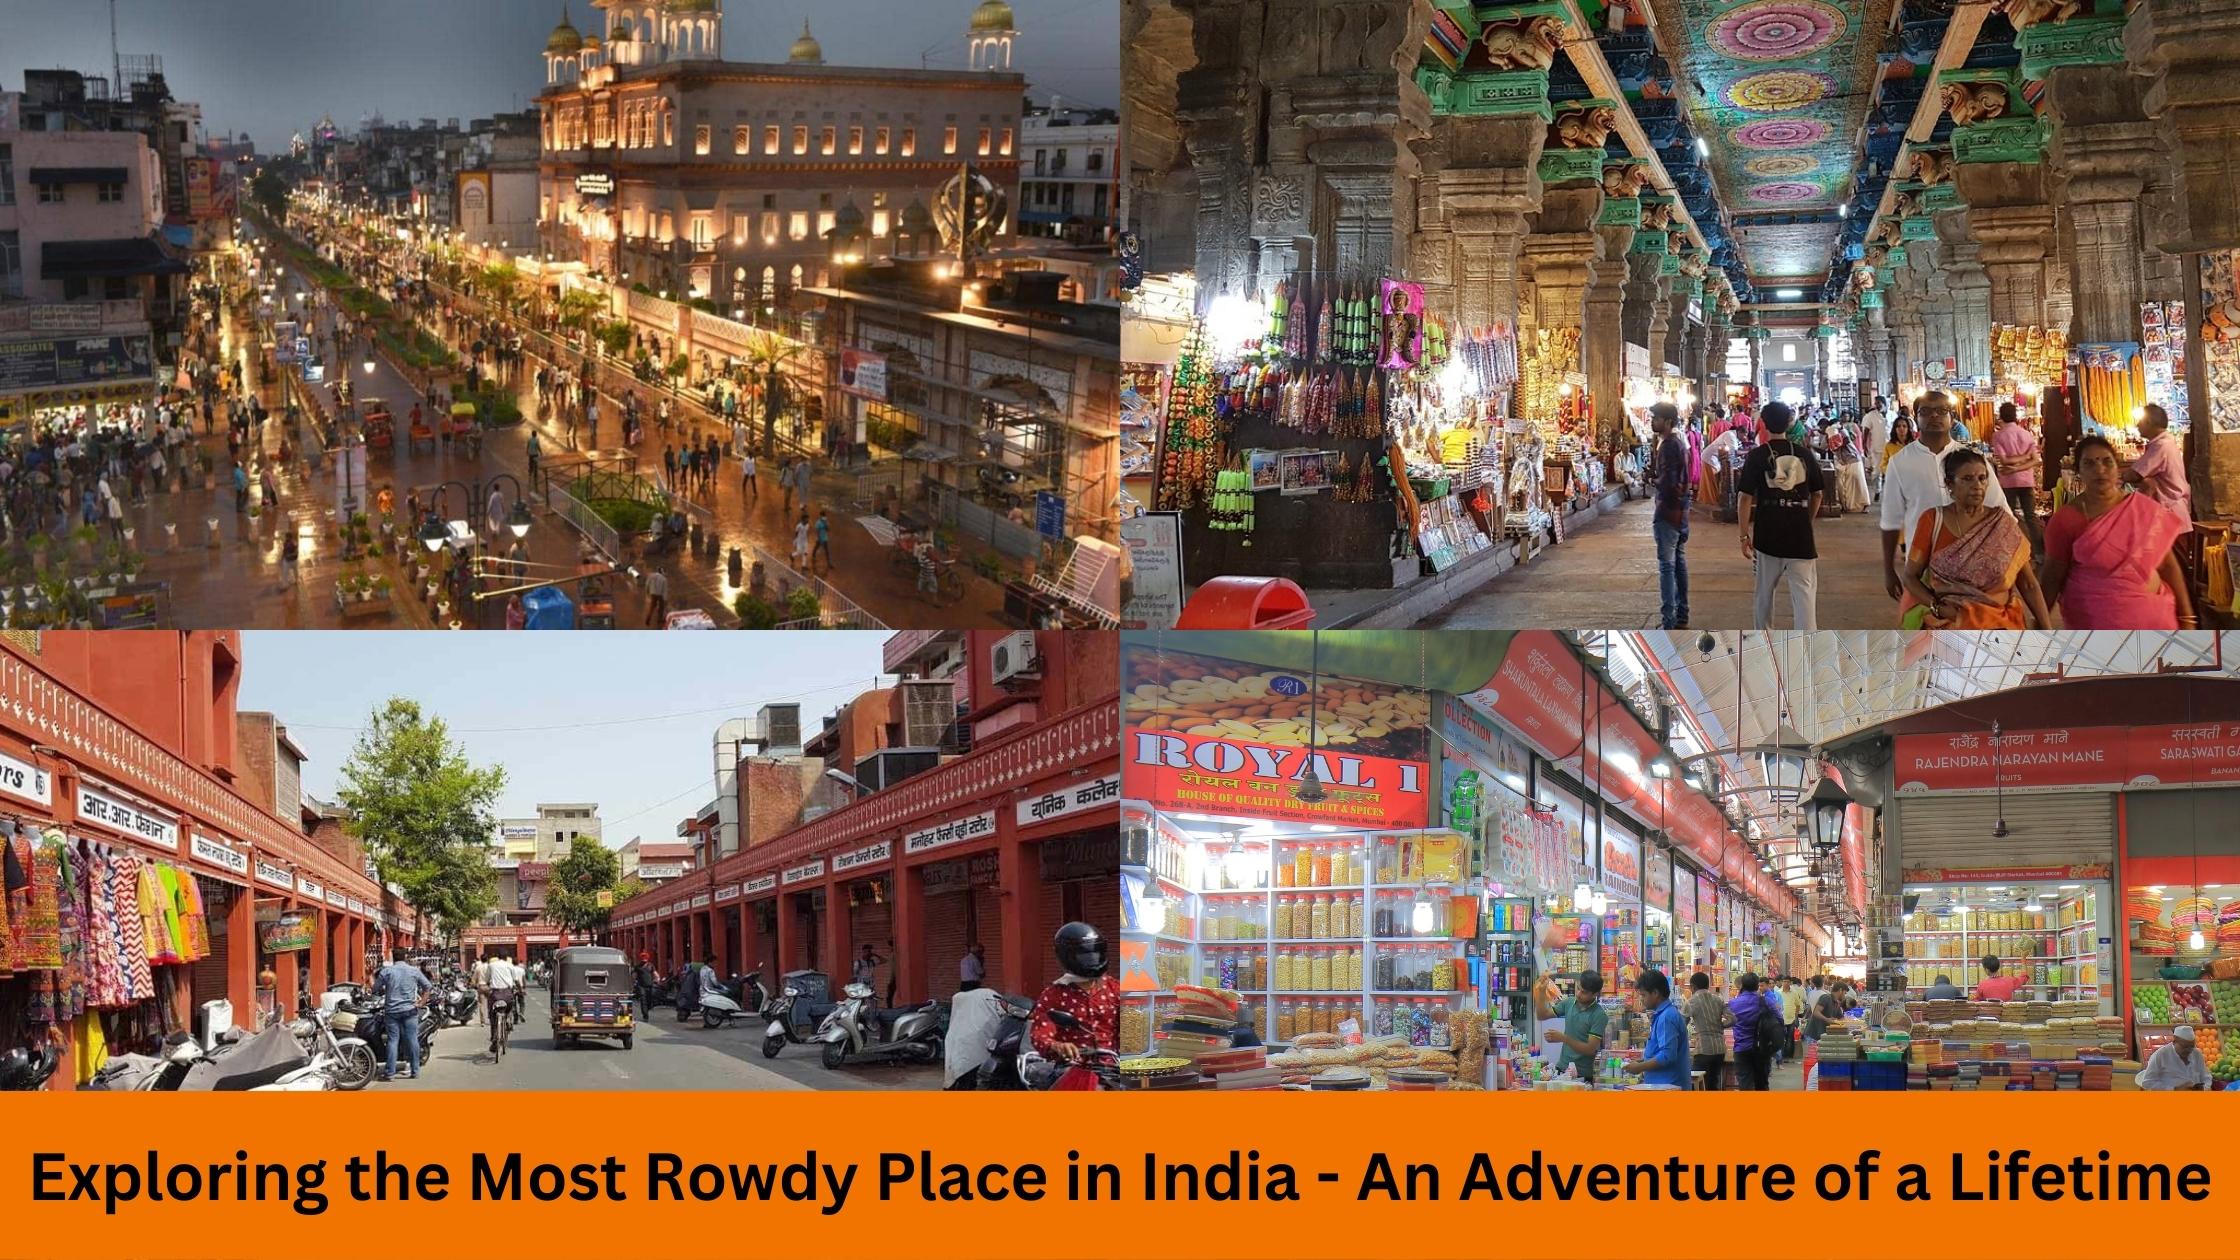 Rowdy place in India